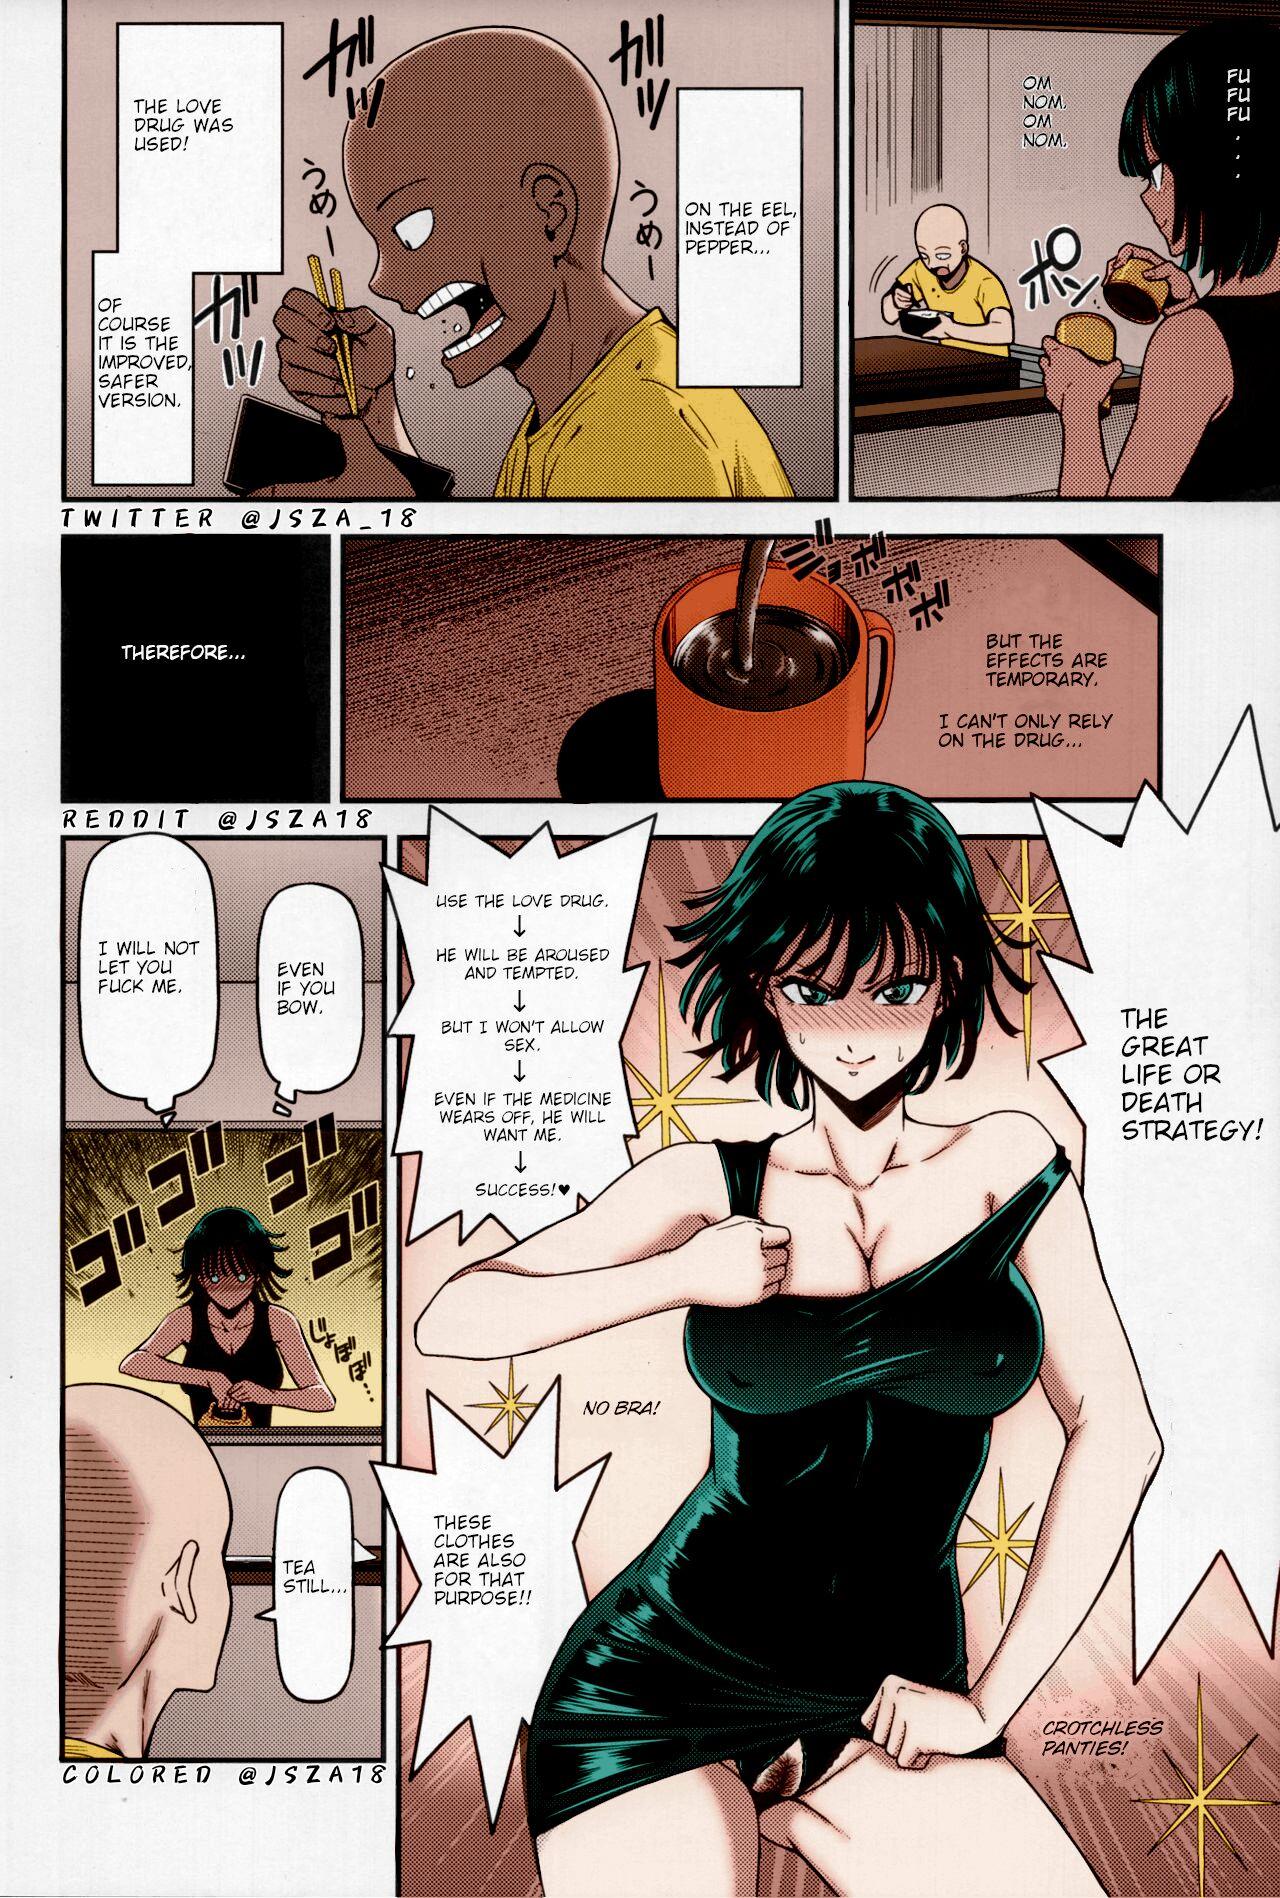 Huge Ass ONE-HURRICANE 6 - One punch man Messy - Page 5